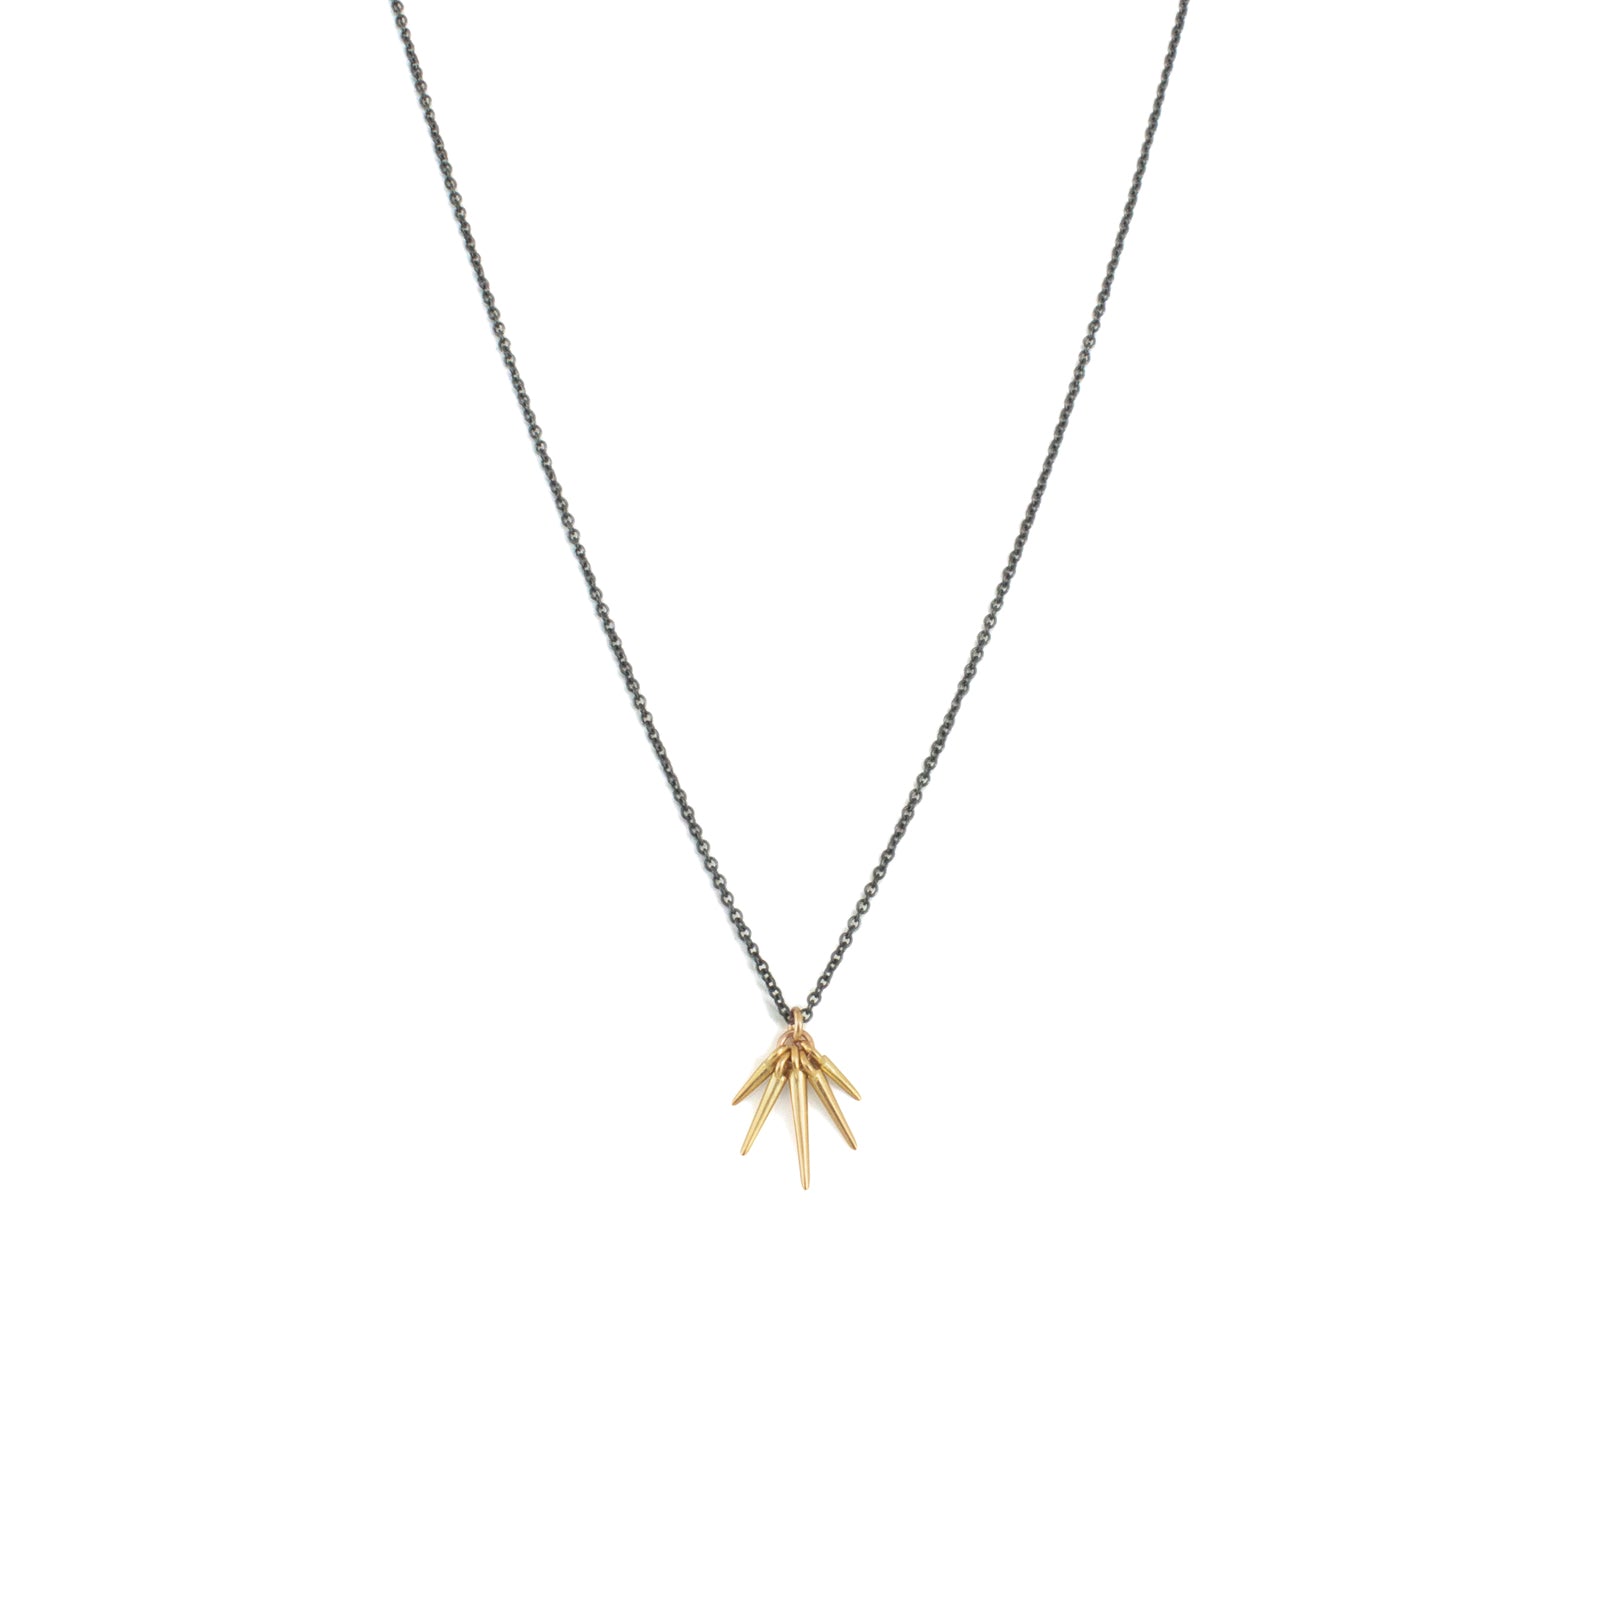 18k yellow gold/oxidized silver chain / small fan points necklace